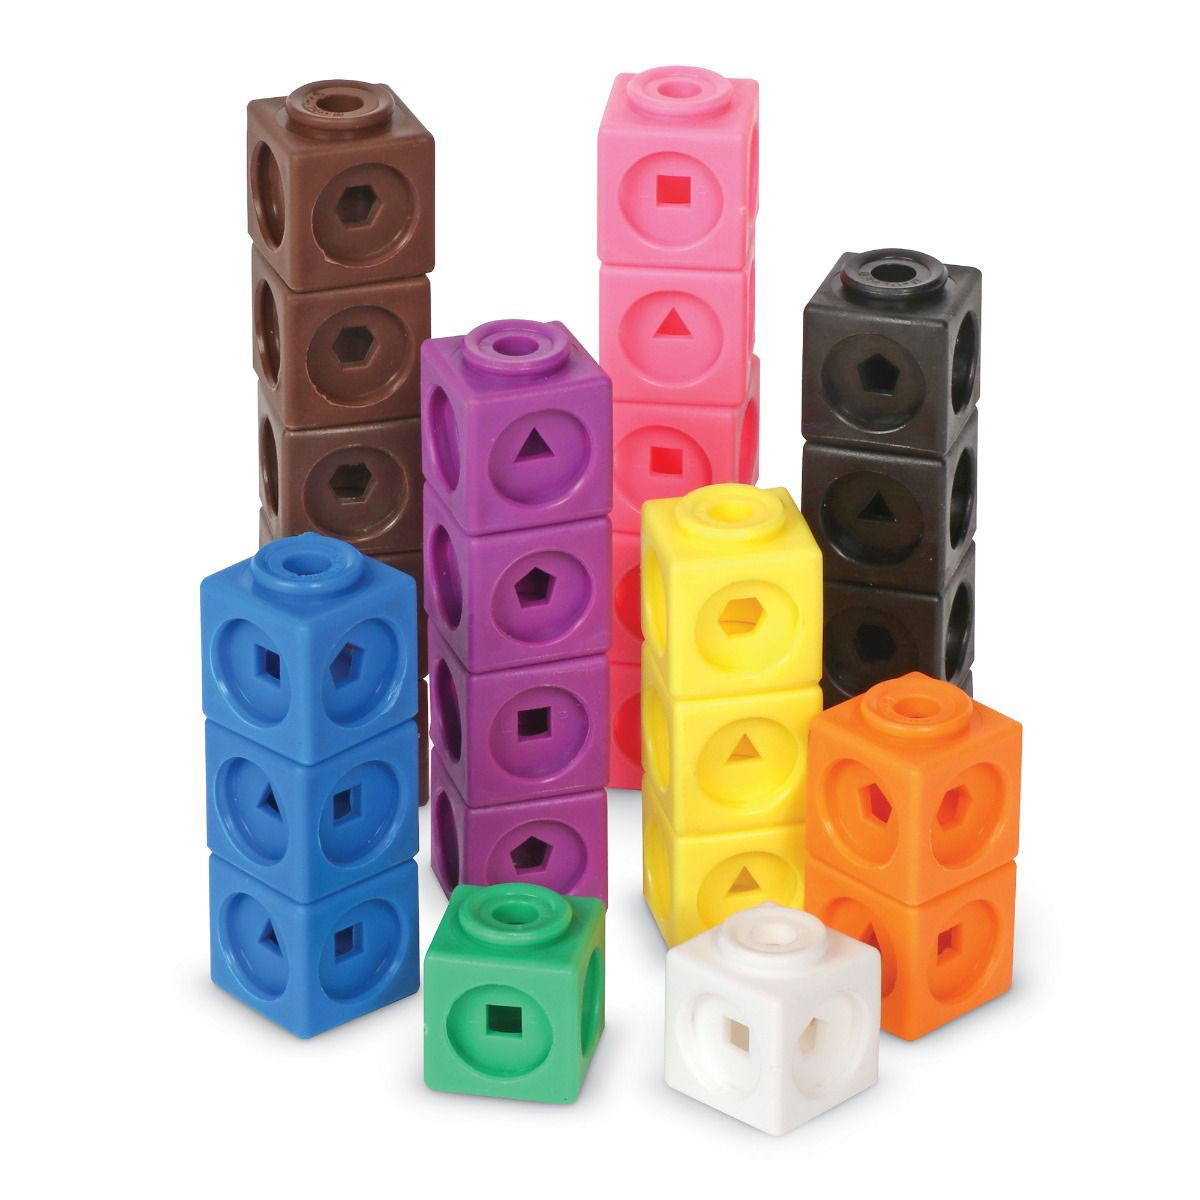 MATHLINK CUBES set 100 connecting cubes  maths muliplication division learning